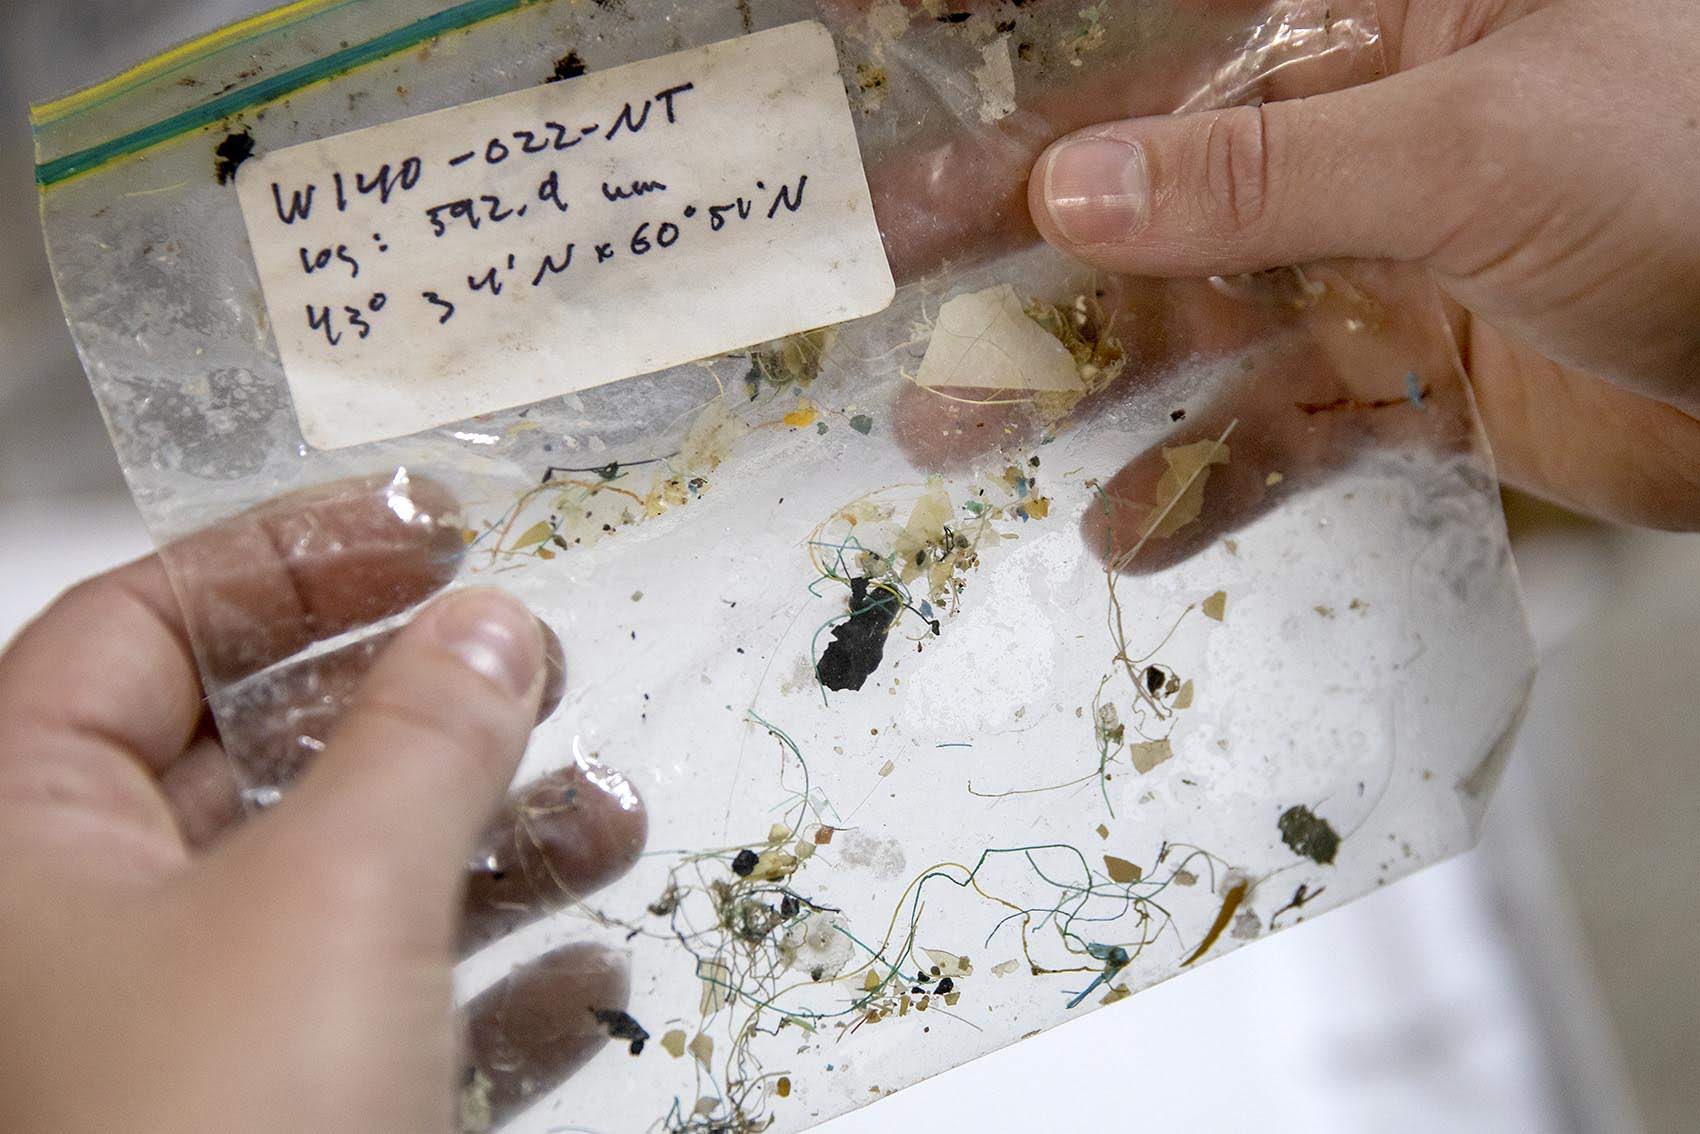 Plastic particles and filaments collected in a 1995 Atlantic Ocean tow. (Robin Lubbock/WBUR)